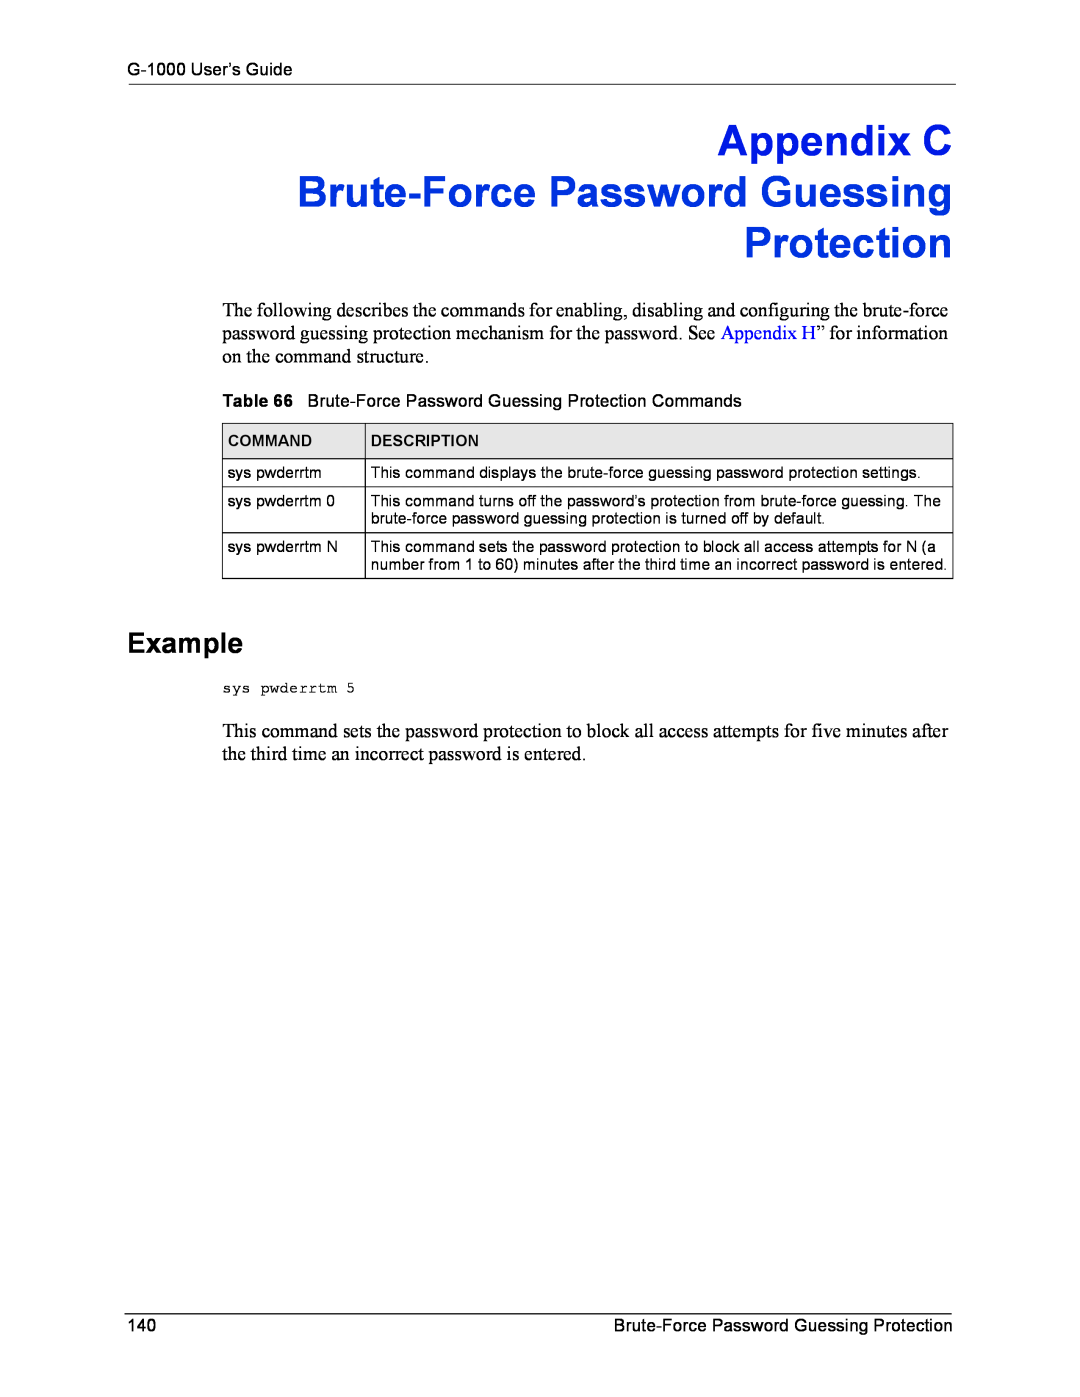 ZyXEL Communications G-1000 manual Appendix C, Brute-Force Password Guessing Protection, Example 